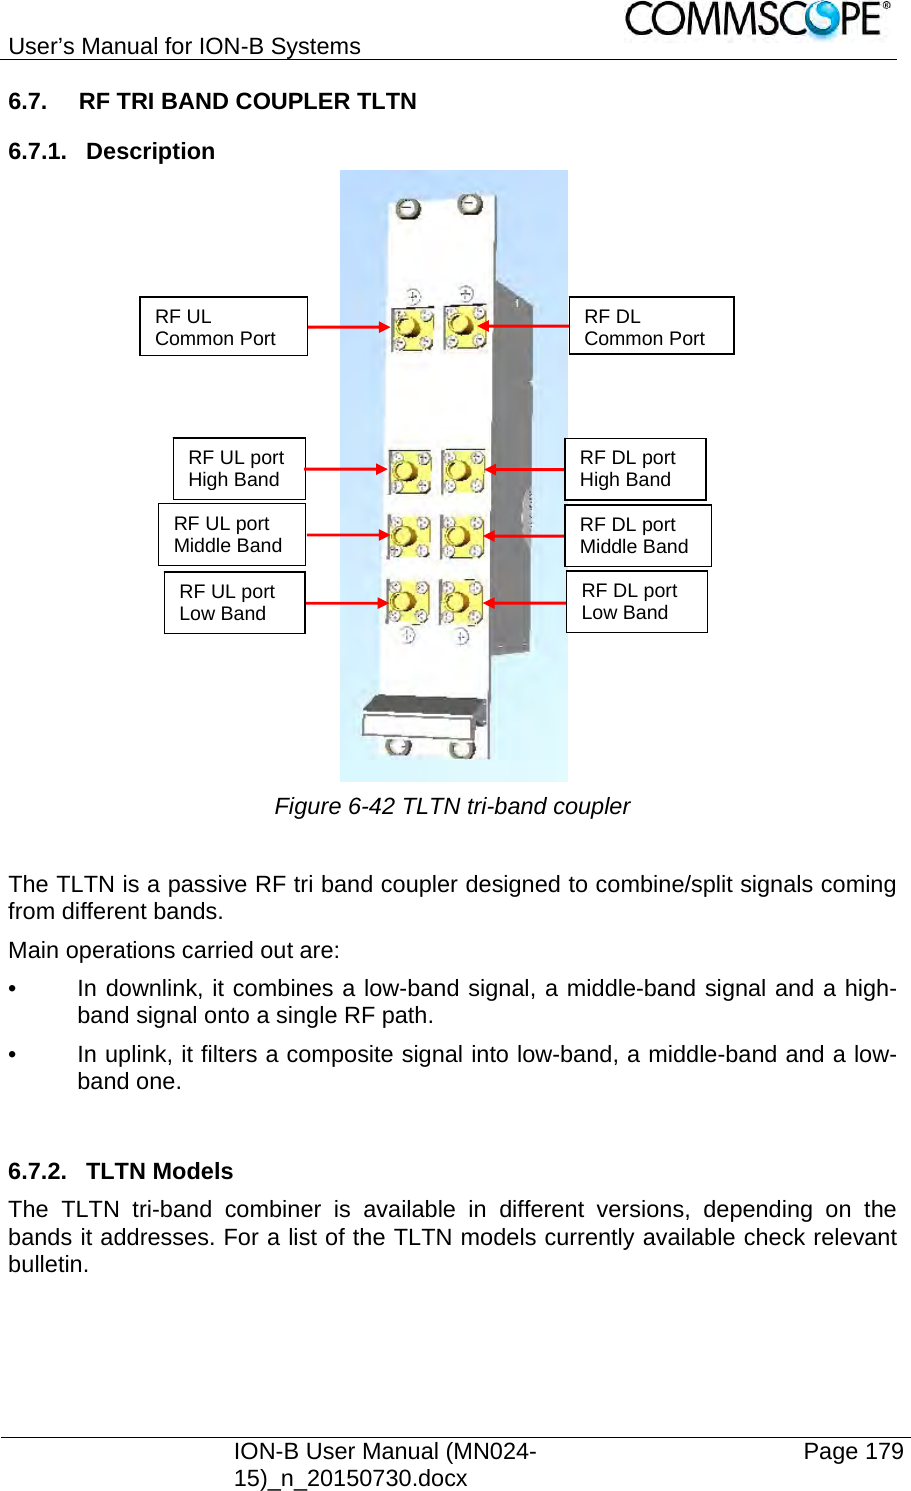 User’s Manual for ION-B Systems    ION-B User Manual (MN024-15)_n_20150730.docx  Page 179 6.7.  RF TRI BAND COUPLER TLTN 6.7.1. Description  Figure 6-42 TLTN tri-band coupler  The TLTN is a passive RF tri band coupler designed to combine/split signals coming from different bands. Main operations carried out are: •  In downlink, it combines a low-band signal, a middle-band signal and a high-band signal onto a single RF path. •  In uplink, it filters a composite signal into low-band, a middle-band and a low-band one.  6.7.2. TLTN Models The TLTN tri-band combiner is available in different versions, depending on the bands it addresses. For a list of the TLTN models currently available check relevant bulletin.   RF UL port Middle Band  RF DL port Middle Band RF UL Common Port  RF DL Common PortRF UL port Low Band   RF DL port Low Band RF UL port High Band  RF DL port High Band 